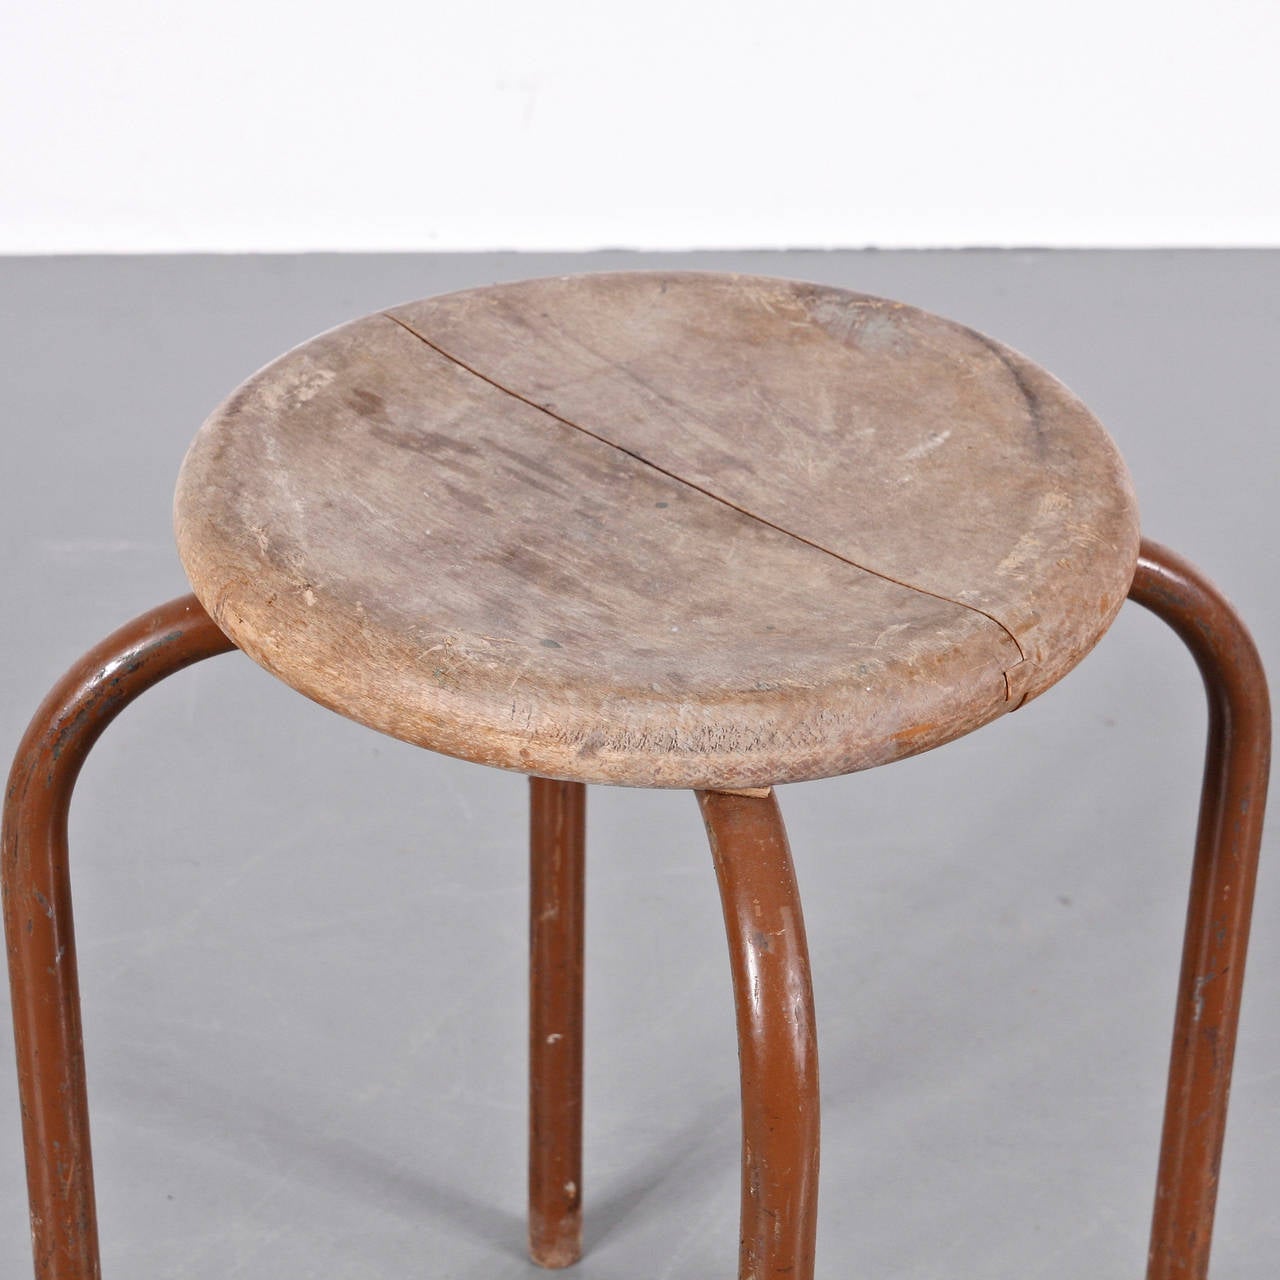 Mid-20th Century Industrial Stool in the Manner of Jean Prouvé Stool, circa 1950